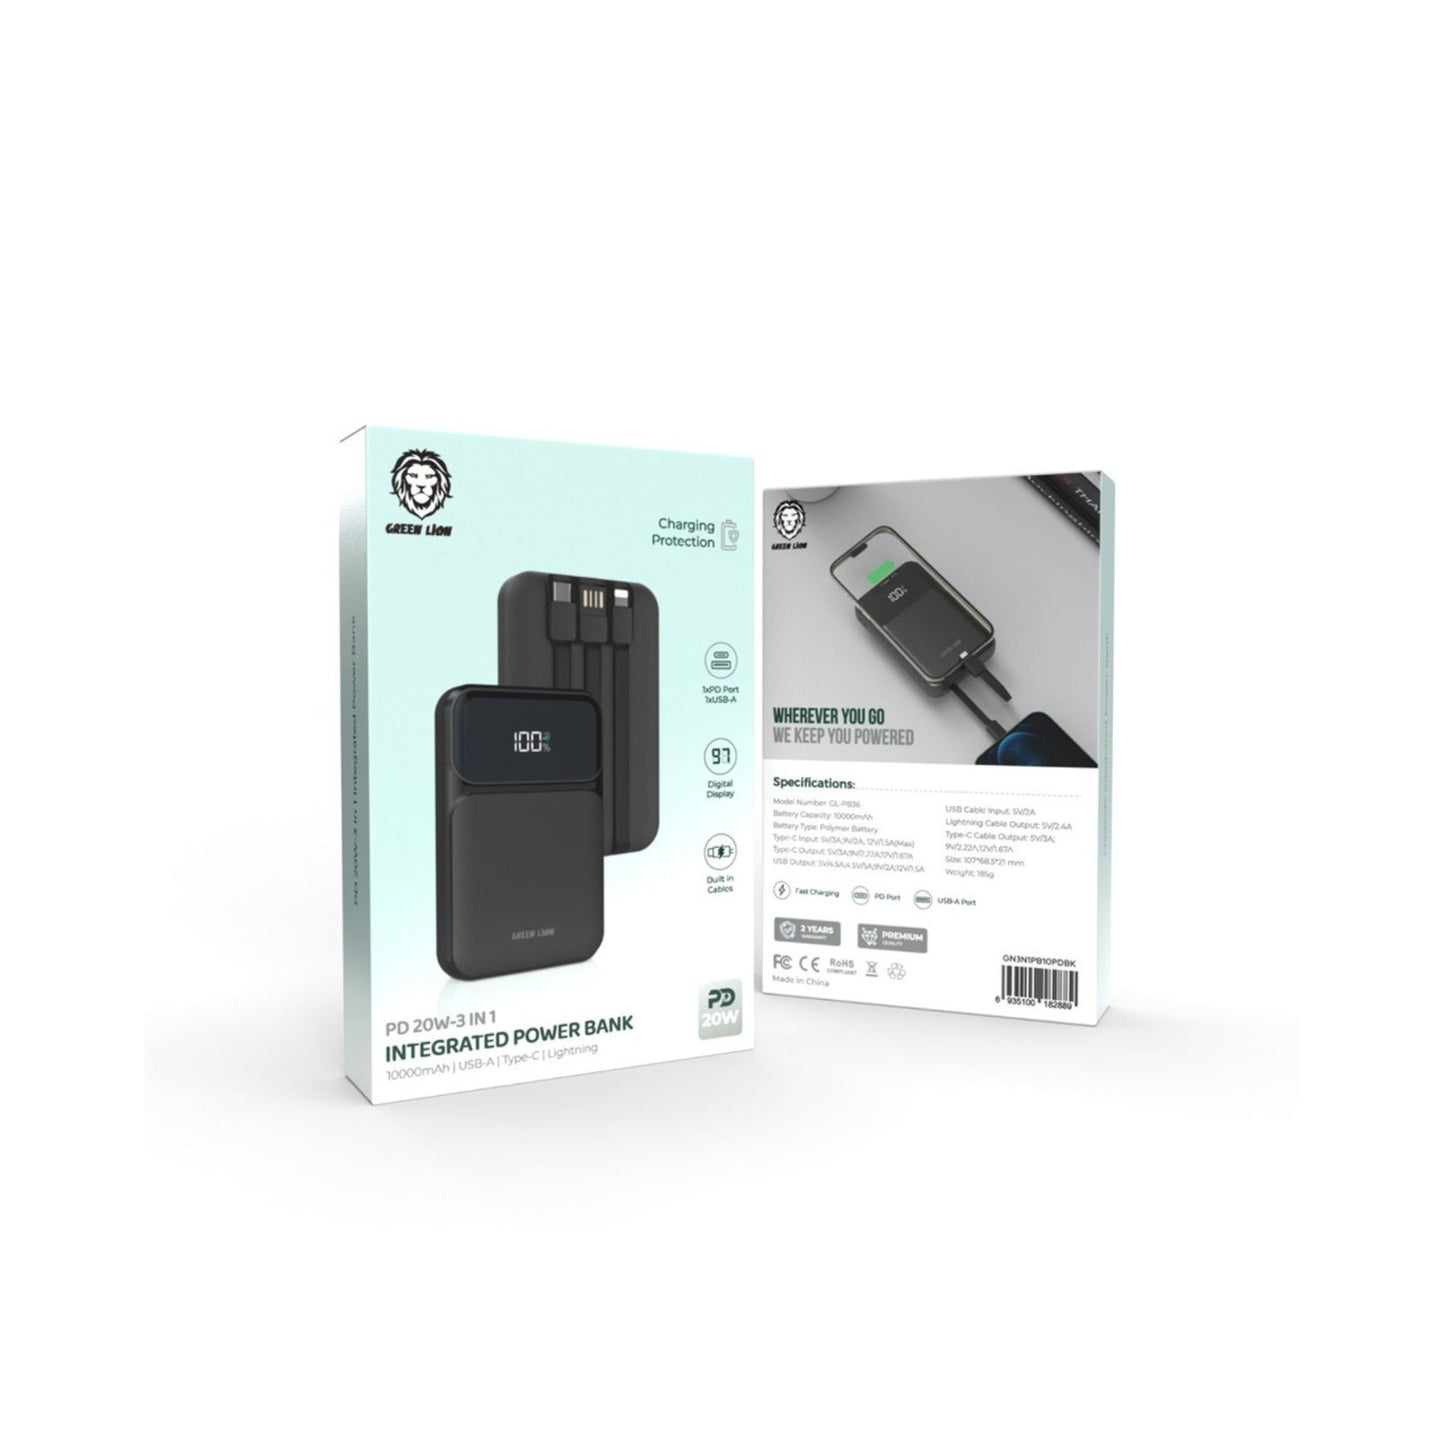 Green Lion 3 in 1  Integrated Power Bank 10000mAh PD  20W - Black